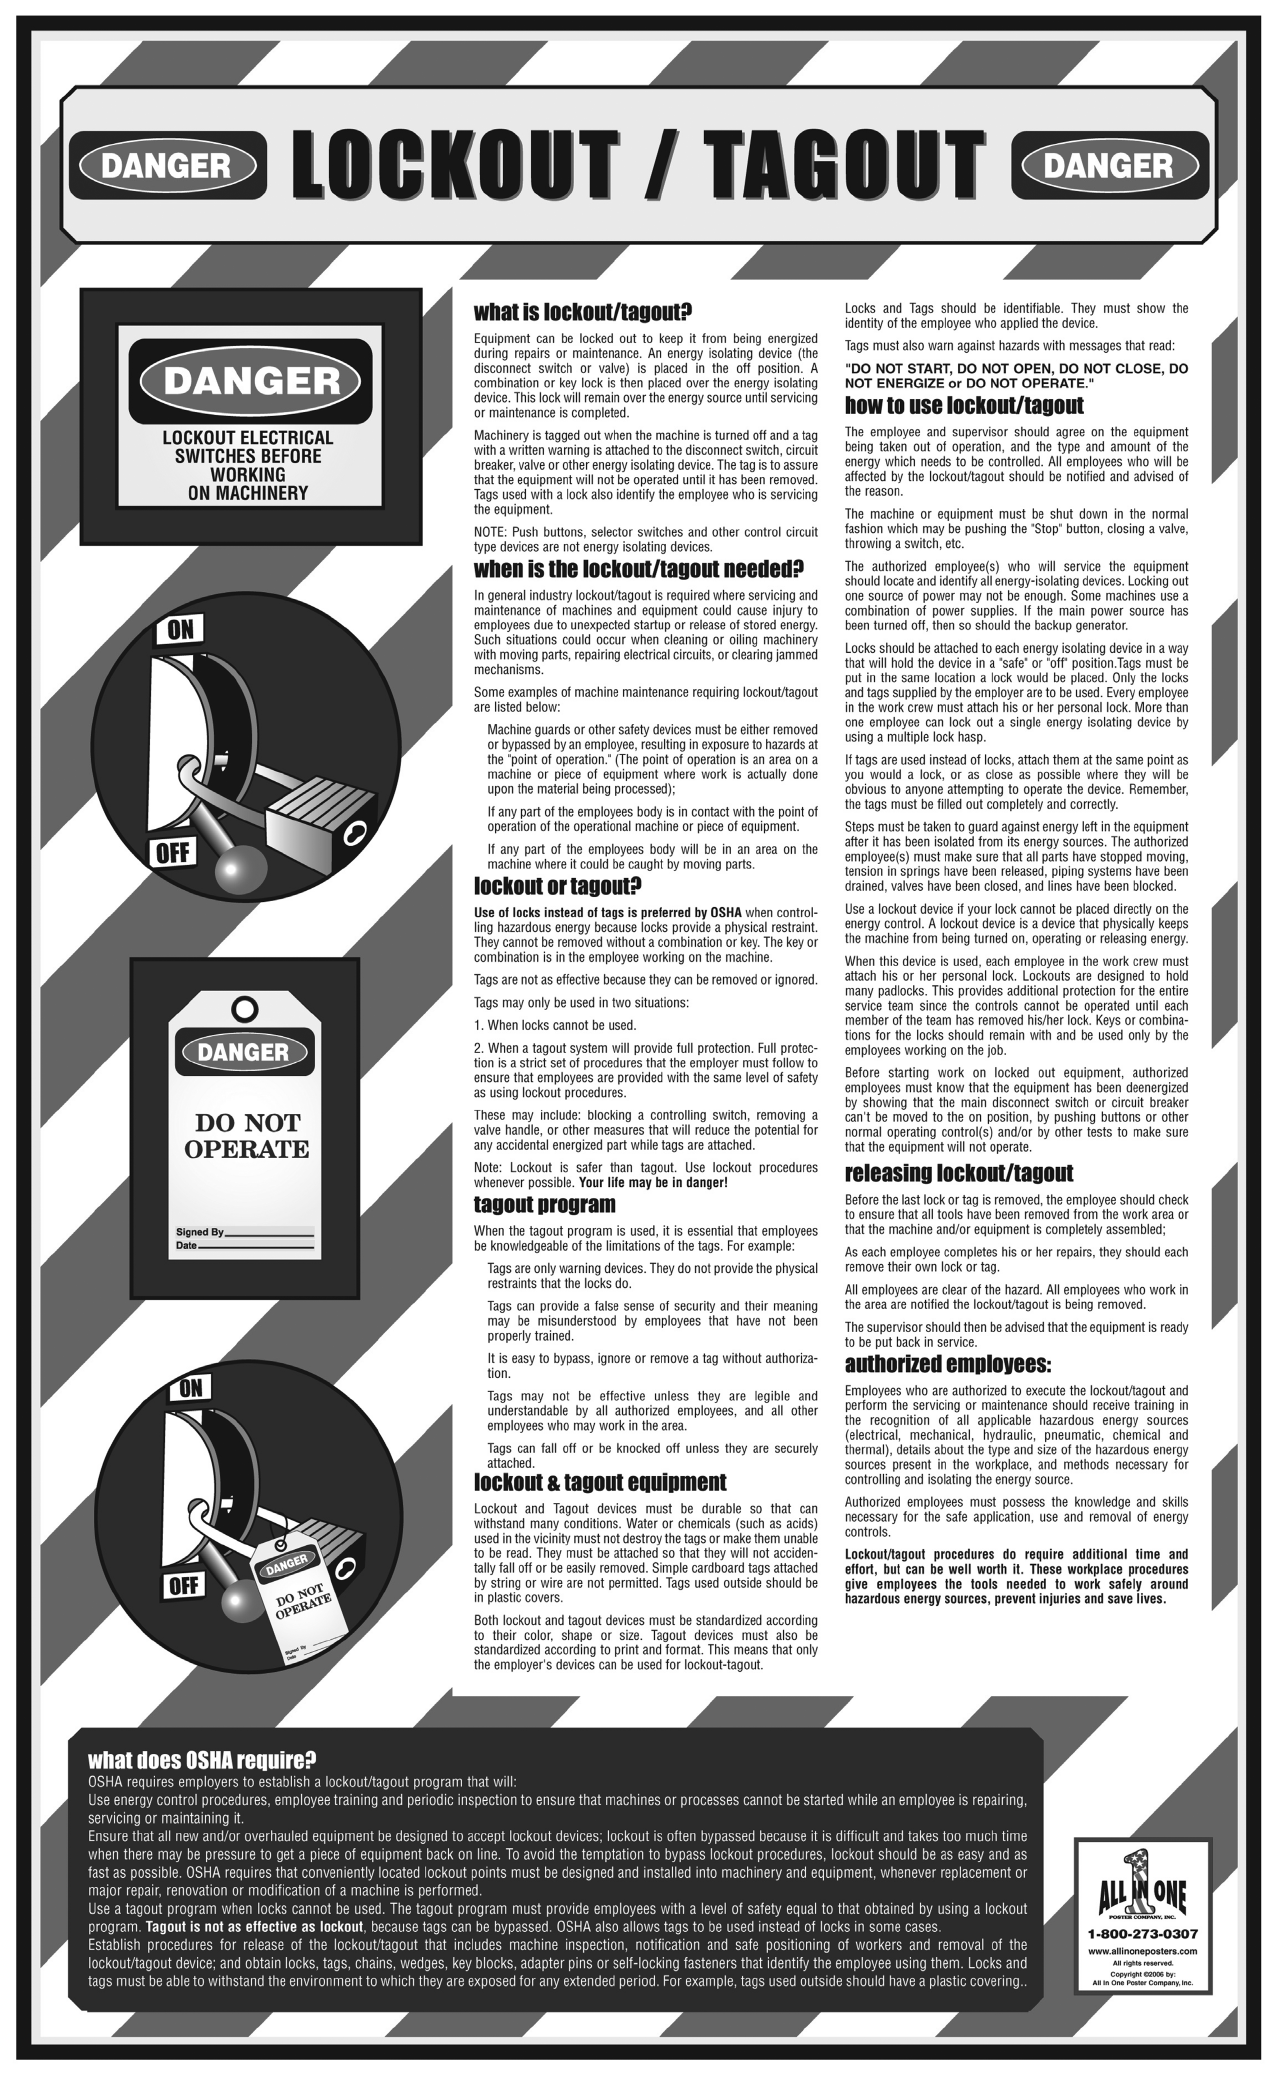 Image of Lockout/tagout (From the All in One Poster Company, Buena Park, CA)